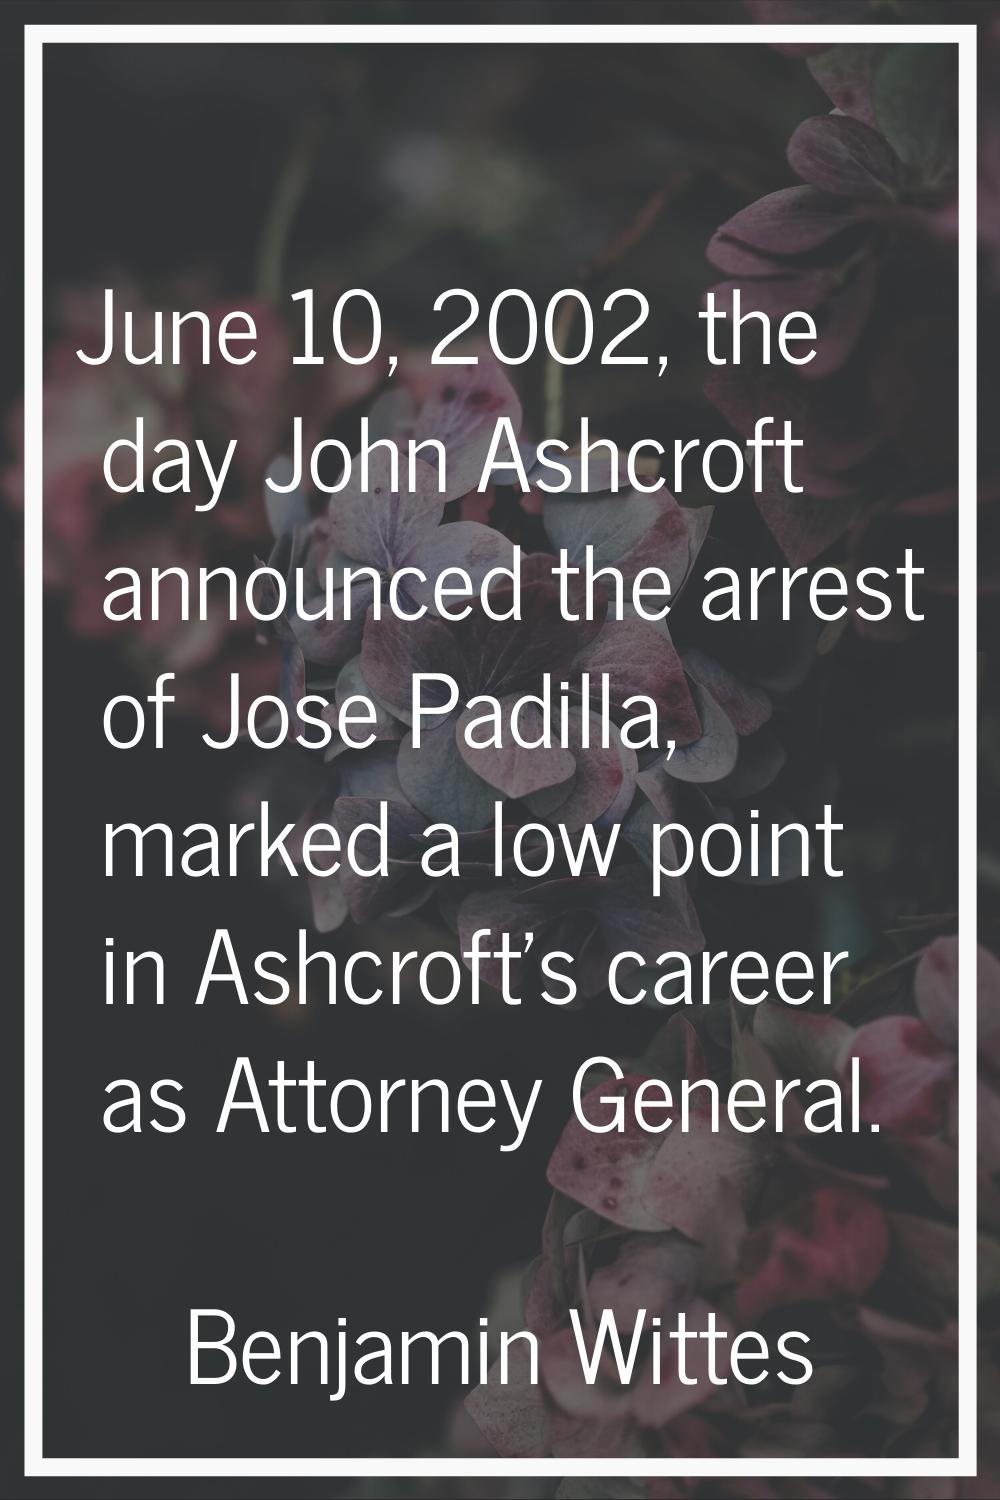 June 10, 2002, the day John Ashcroft announced the arrest of Jose Padilla, marked a low point in As